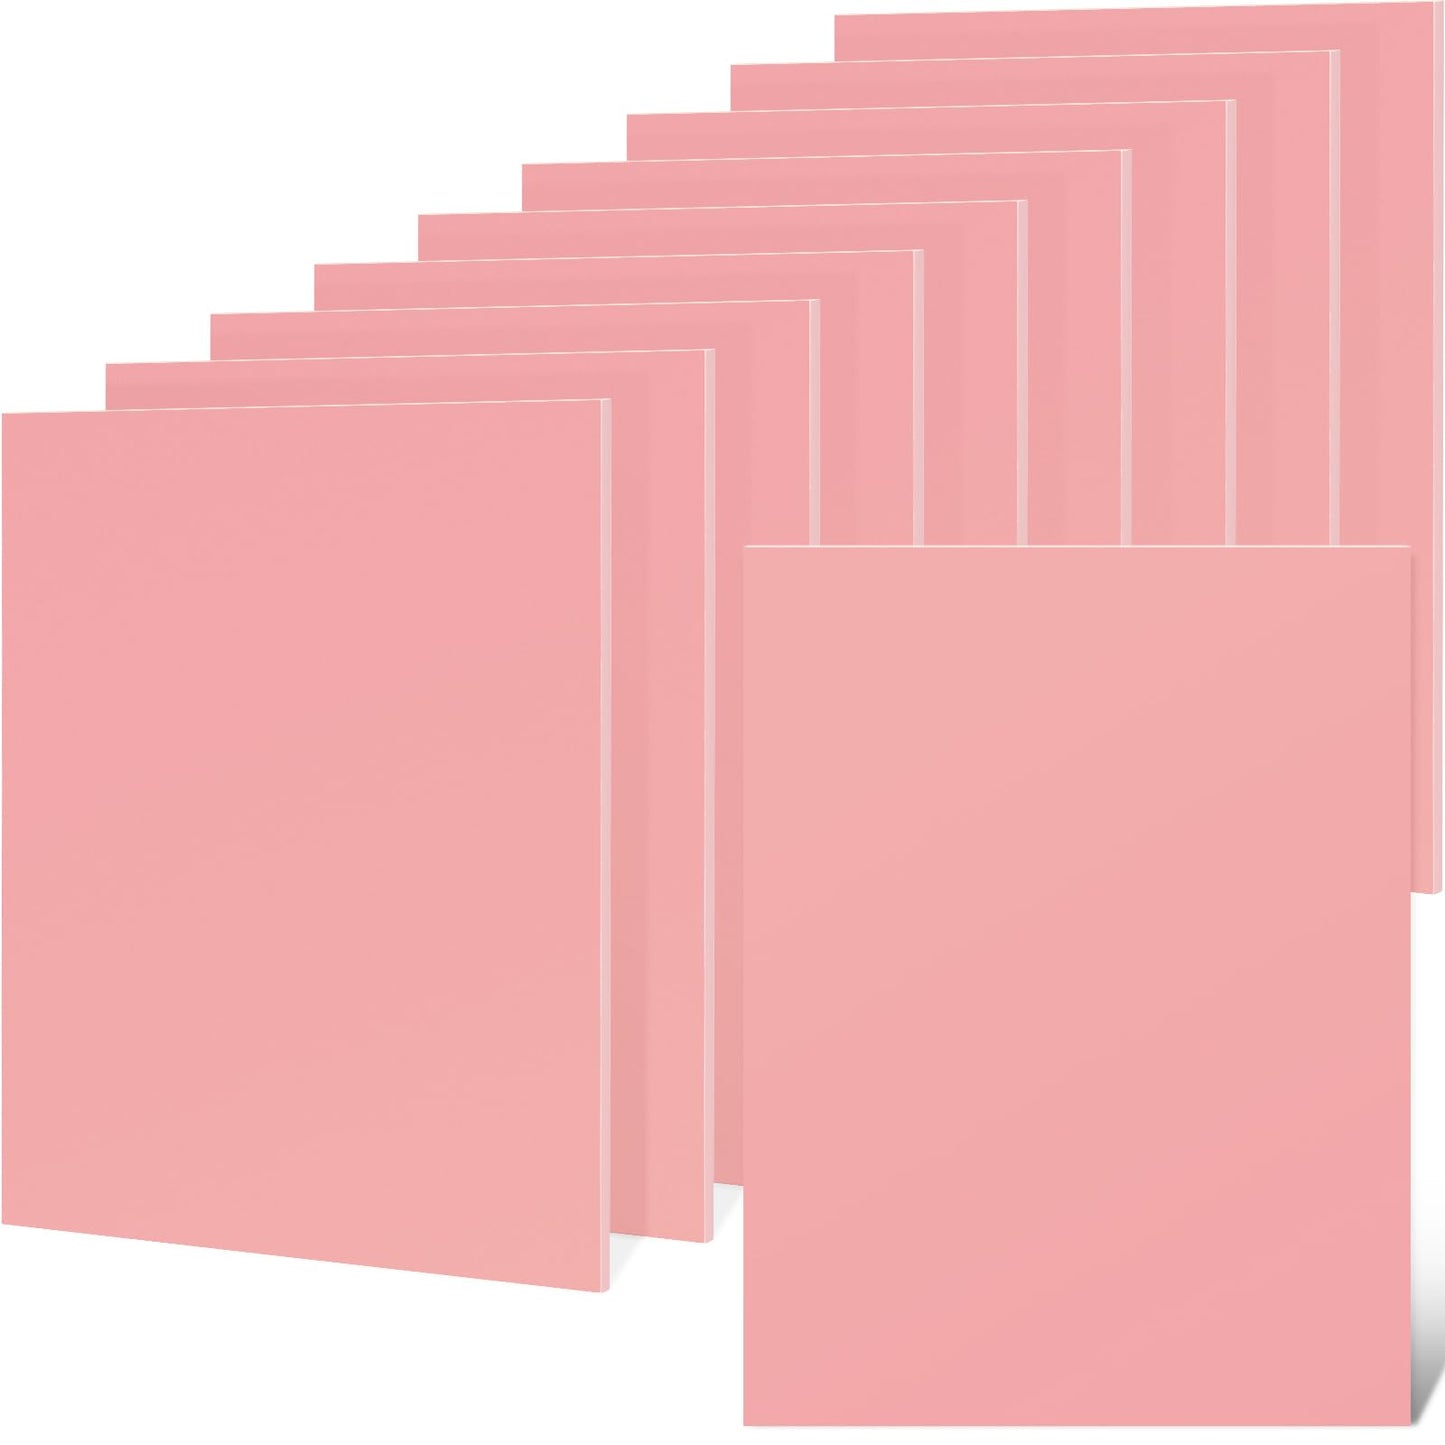 SGHUO 8 Pcs 4x6 Pink Rubber Carving Blocks for Stamp Soft Rubber Crafts, Soft and Easy to Carve